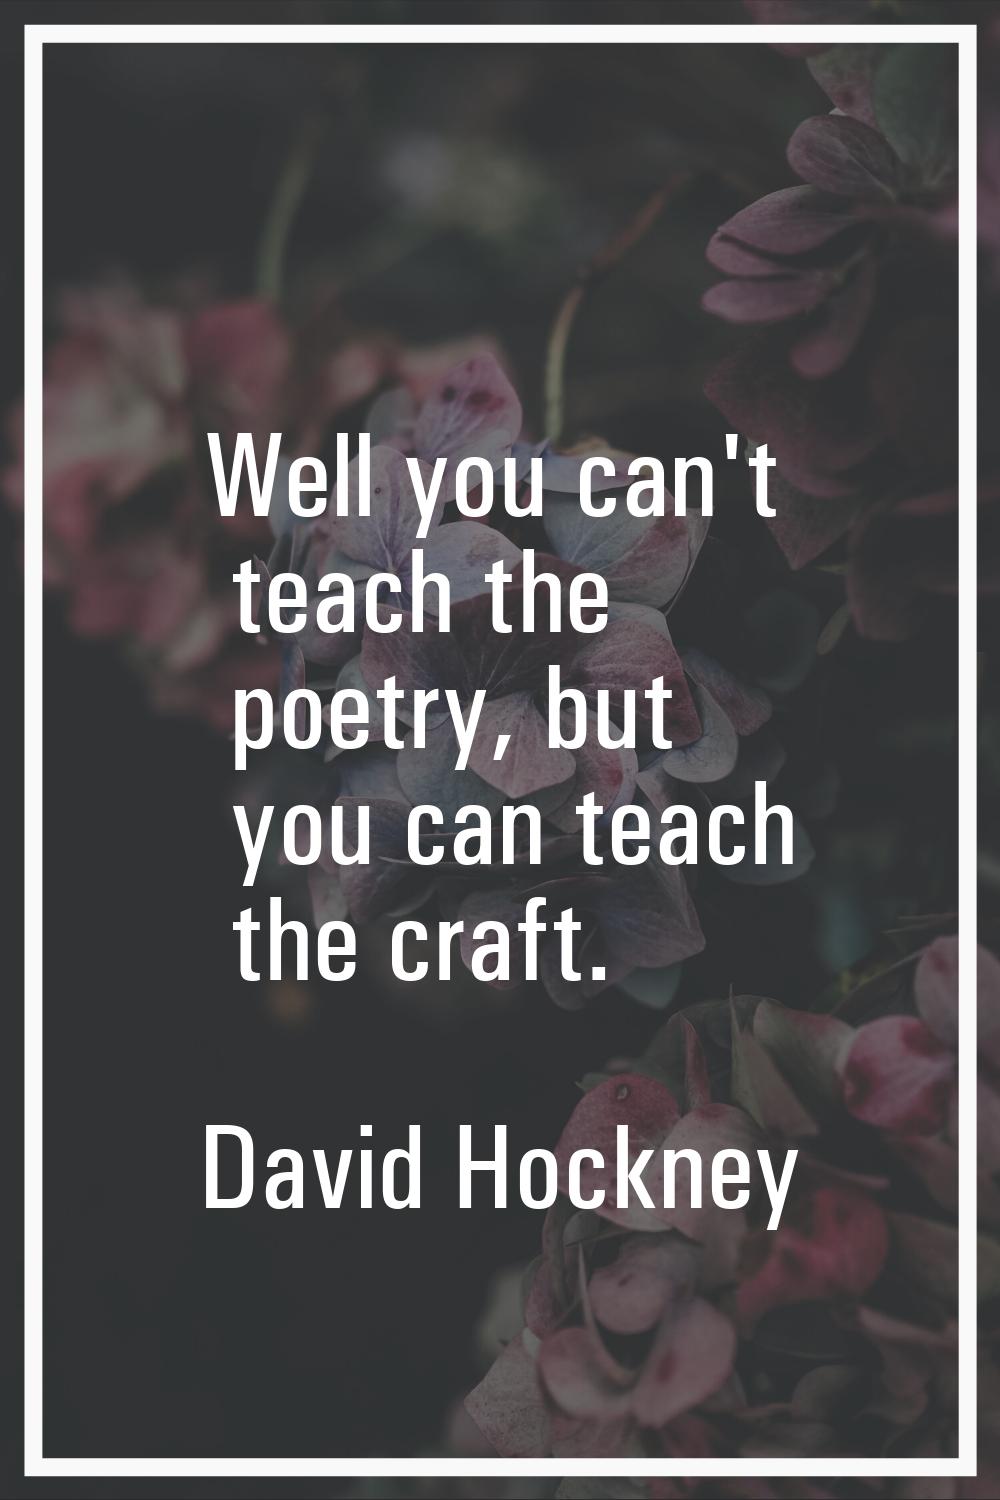 Well you can't teach the poetry, but you can teach the craft.